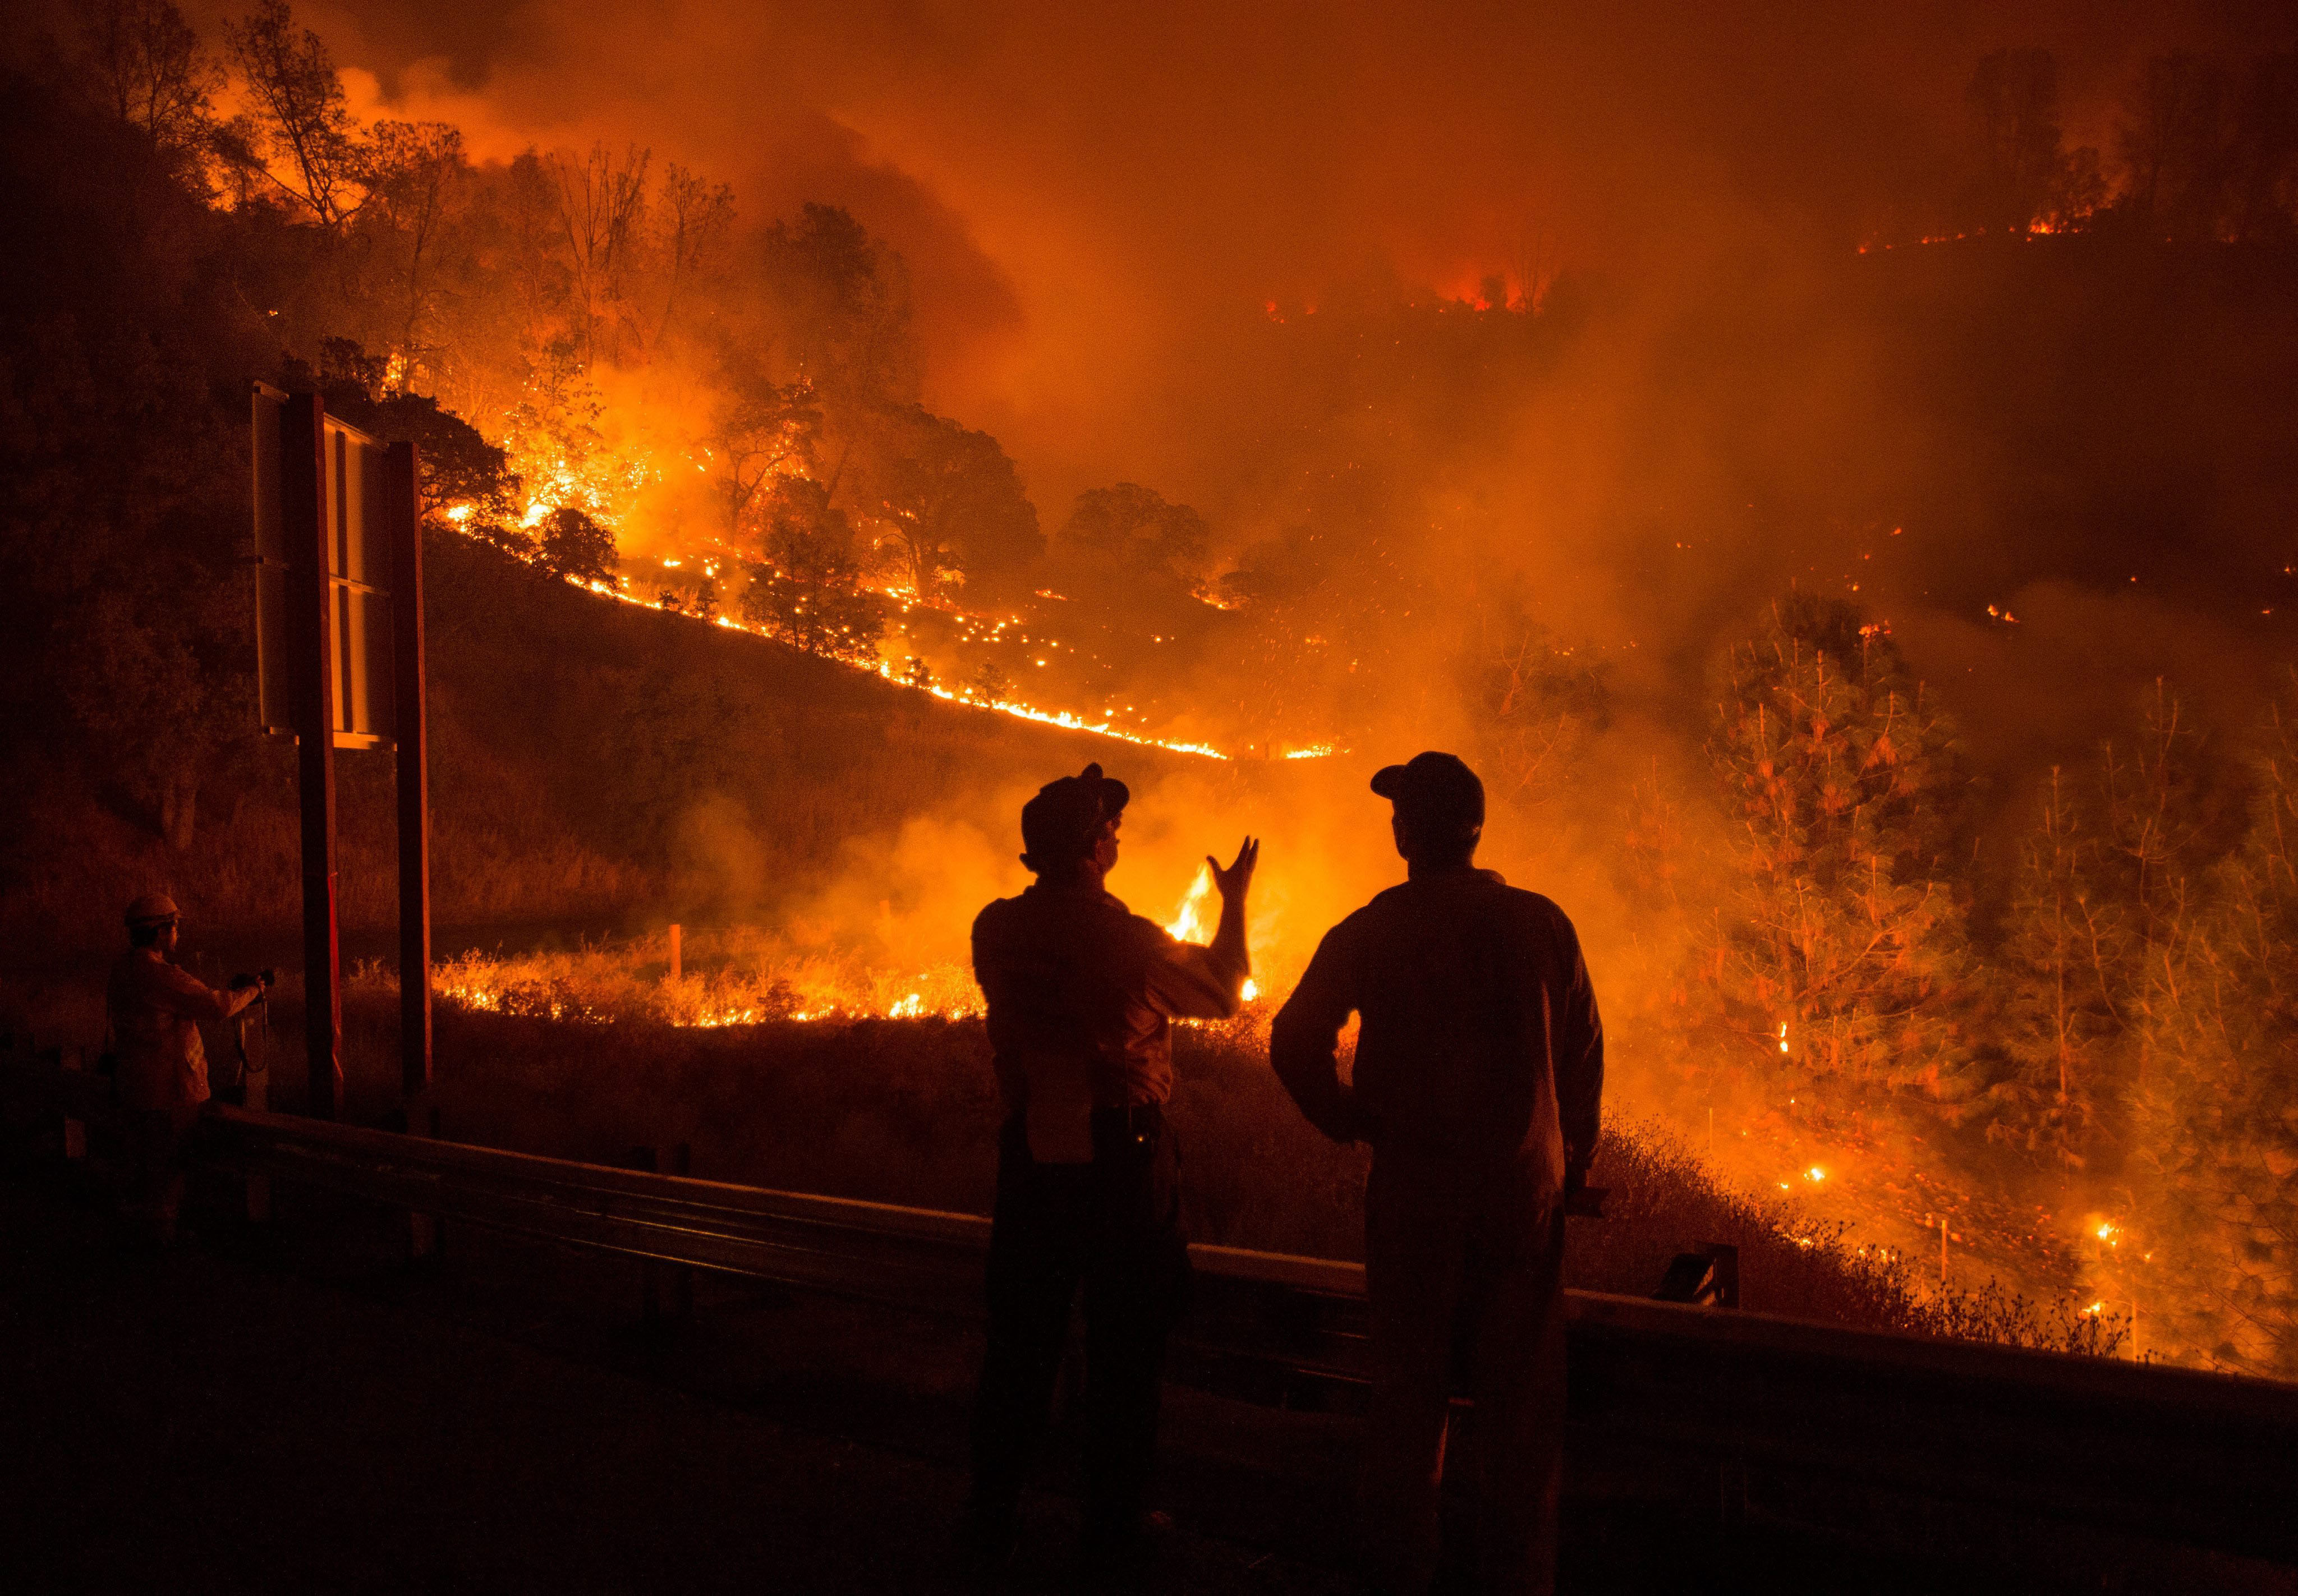 Firefighters Richard Dykhouse, left, and Dan McCabe confer as the Rocky fire burns near Clearlake, Calif. on Aug. 2, 2015. (Noah Berger—EPA)